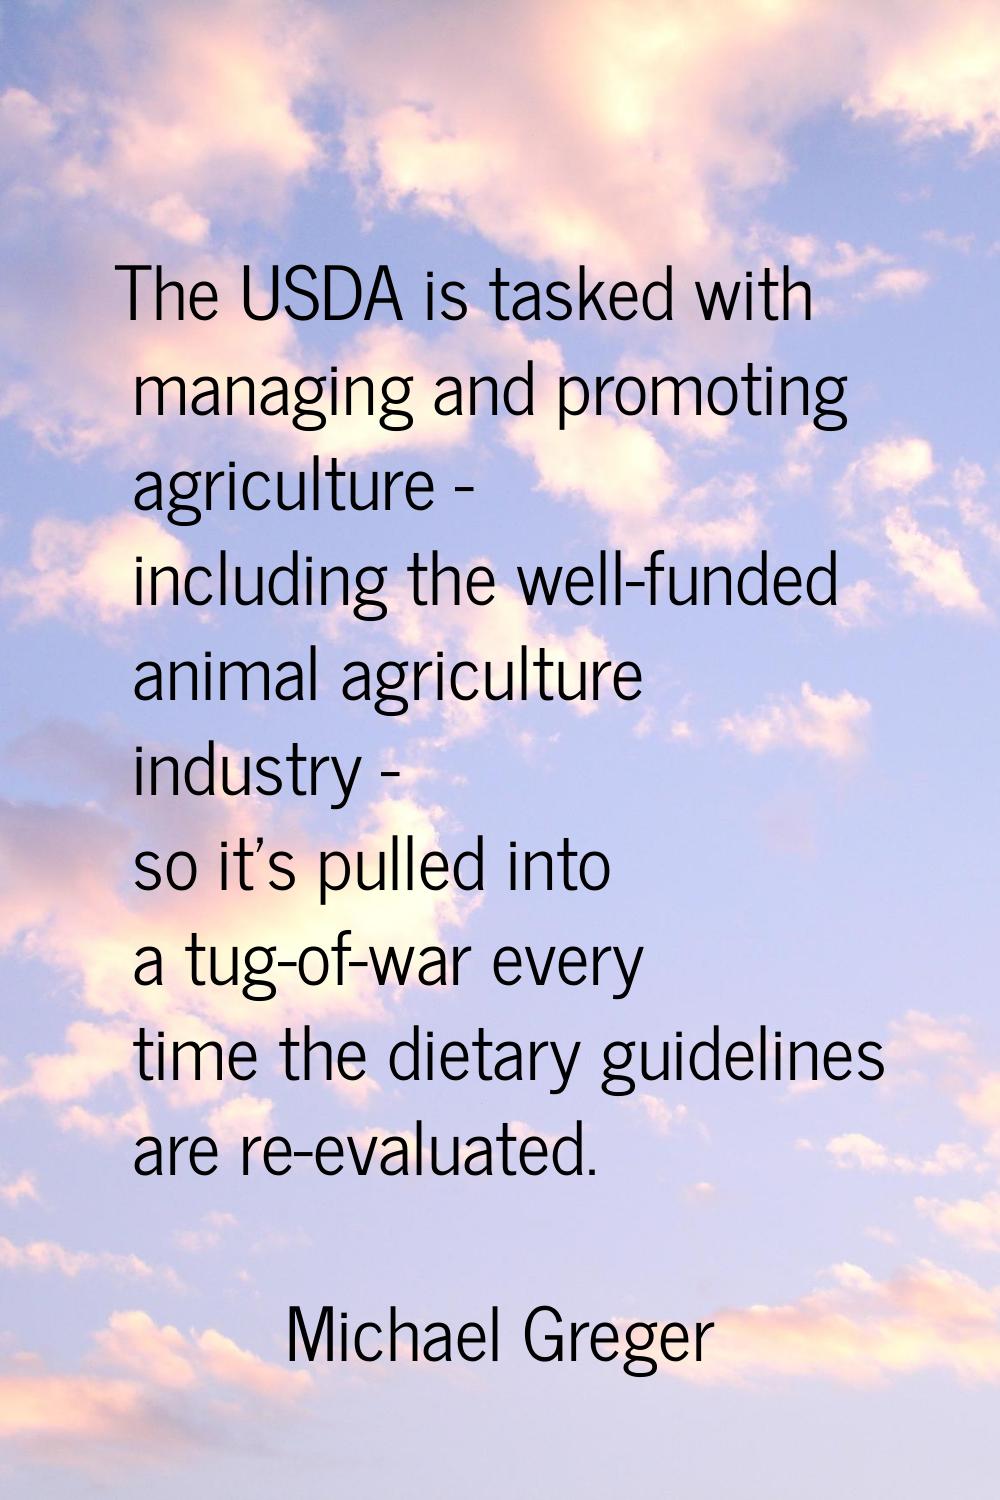 The USDA is tasked with managing and promoting agriculture - including the well-funded animal agric